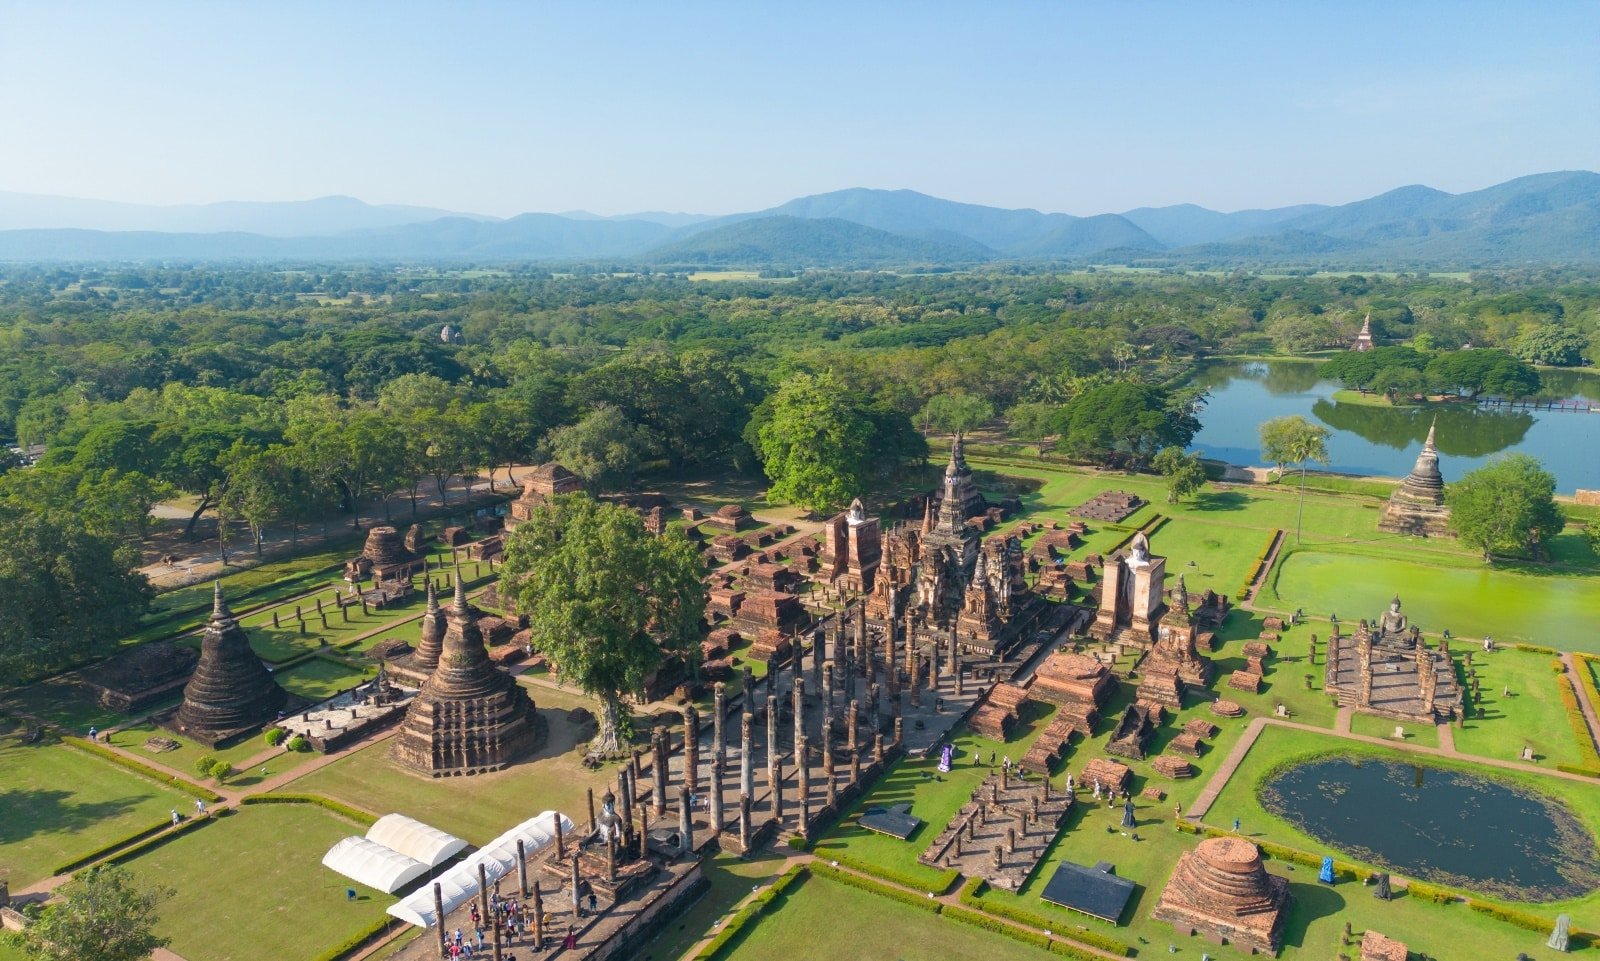 <p><span>Sukhothai, the first capital of Thailand, is where Thai art, architecture, and language began to develop and flourish. The Sukhothai Historical Park, a UNESCO World Heritage Site, is an archaeological delight with well-preserved ruins and majestic Buddha statues set amidst scenic lakes and gardens.</span></p> <p><span>Exploring this ancient city on a bicycle offers a leisurely and intimate experience of the park’s vast grounds. Highlights include Wat Mahathat, with its impressive central stupa, and Wat Si Chum, known for its gigantic seated Buddha.</span></p> <p><span>The historical significance of Sukhothai, coupled with its serene and picturesque setting, provides a profound insight into the origins of Thai culture and the nation’s early history.</span></p> <p><b>Insider’s Tip: </b><span>Visit during the Loy Krathong festival in November, when the park is beautifully lit with lanterns.</span></p> <p><b>How To Get There: </b><span>Sukhothai is accessible by bus or plane from Bangkok and Chiang Mai.</span></p> <p><b>Best Time To Travel: </b><span>The cool season is the best time to visit, especially around the Loy Krathong festival.</span></p>